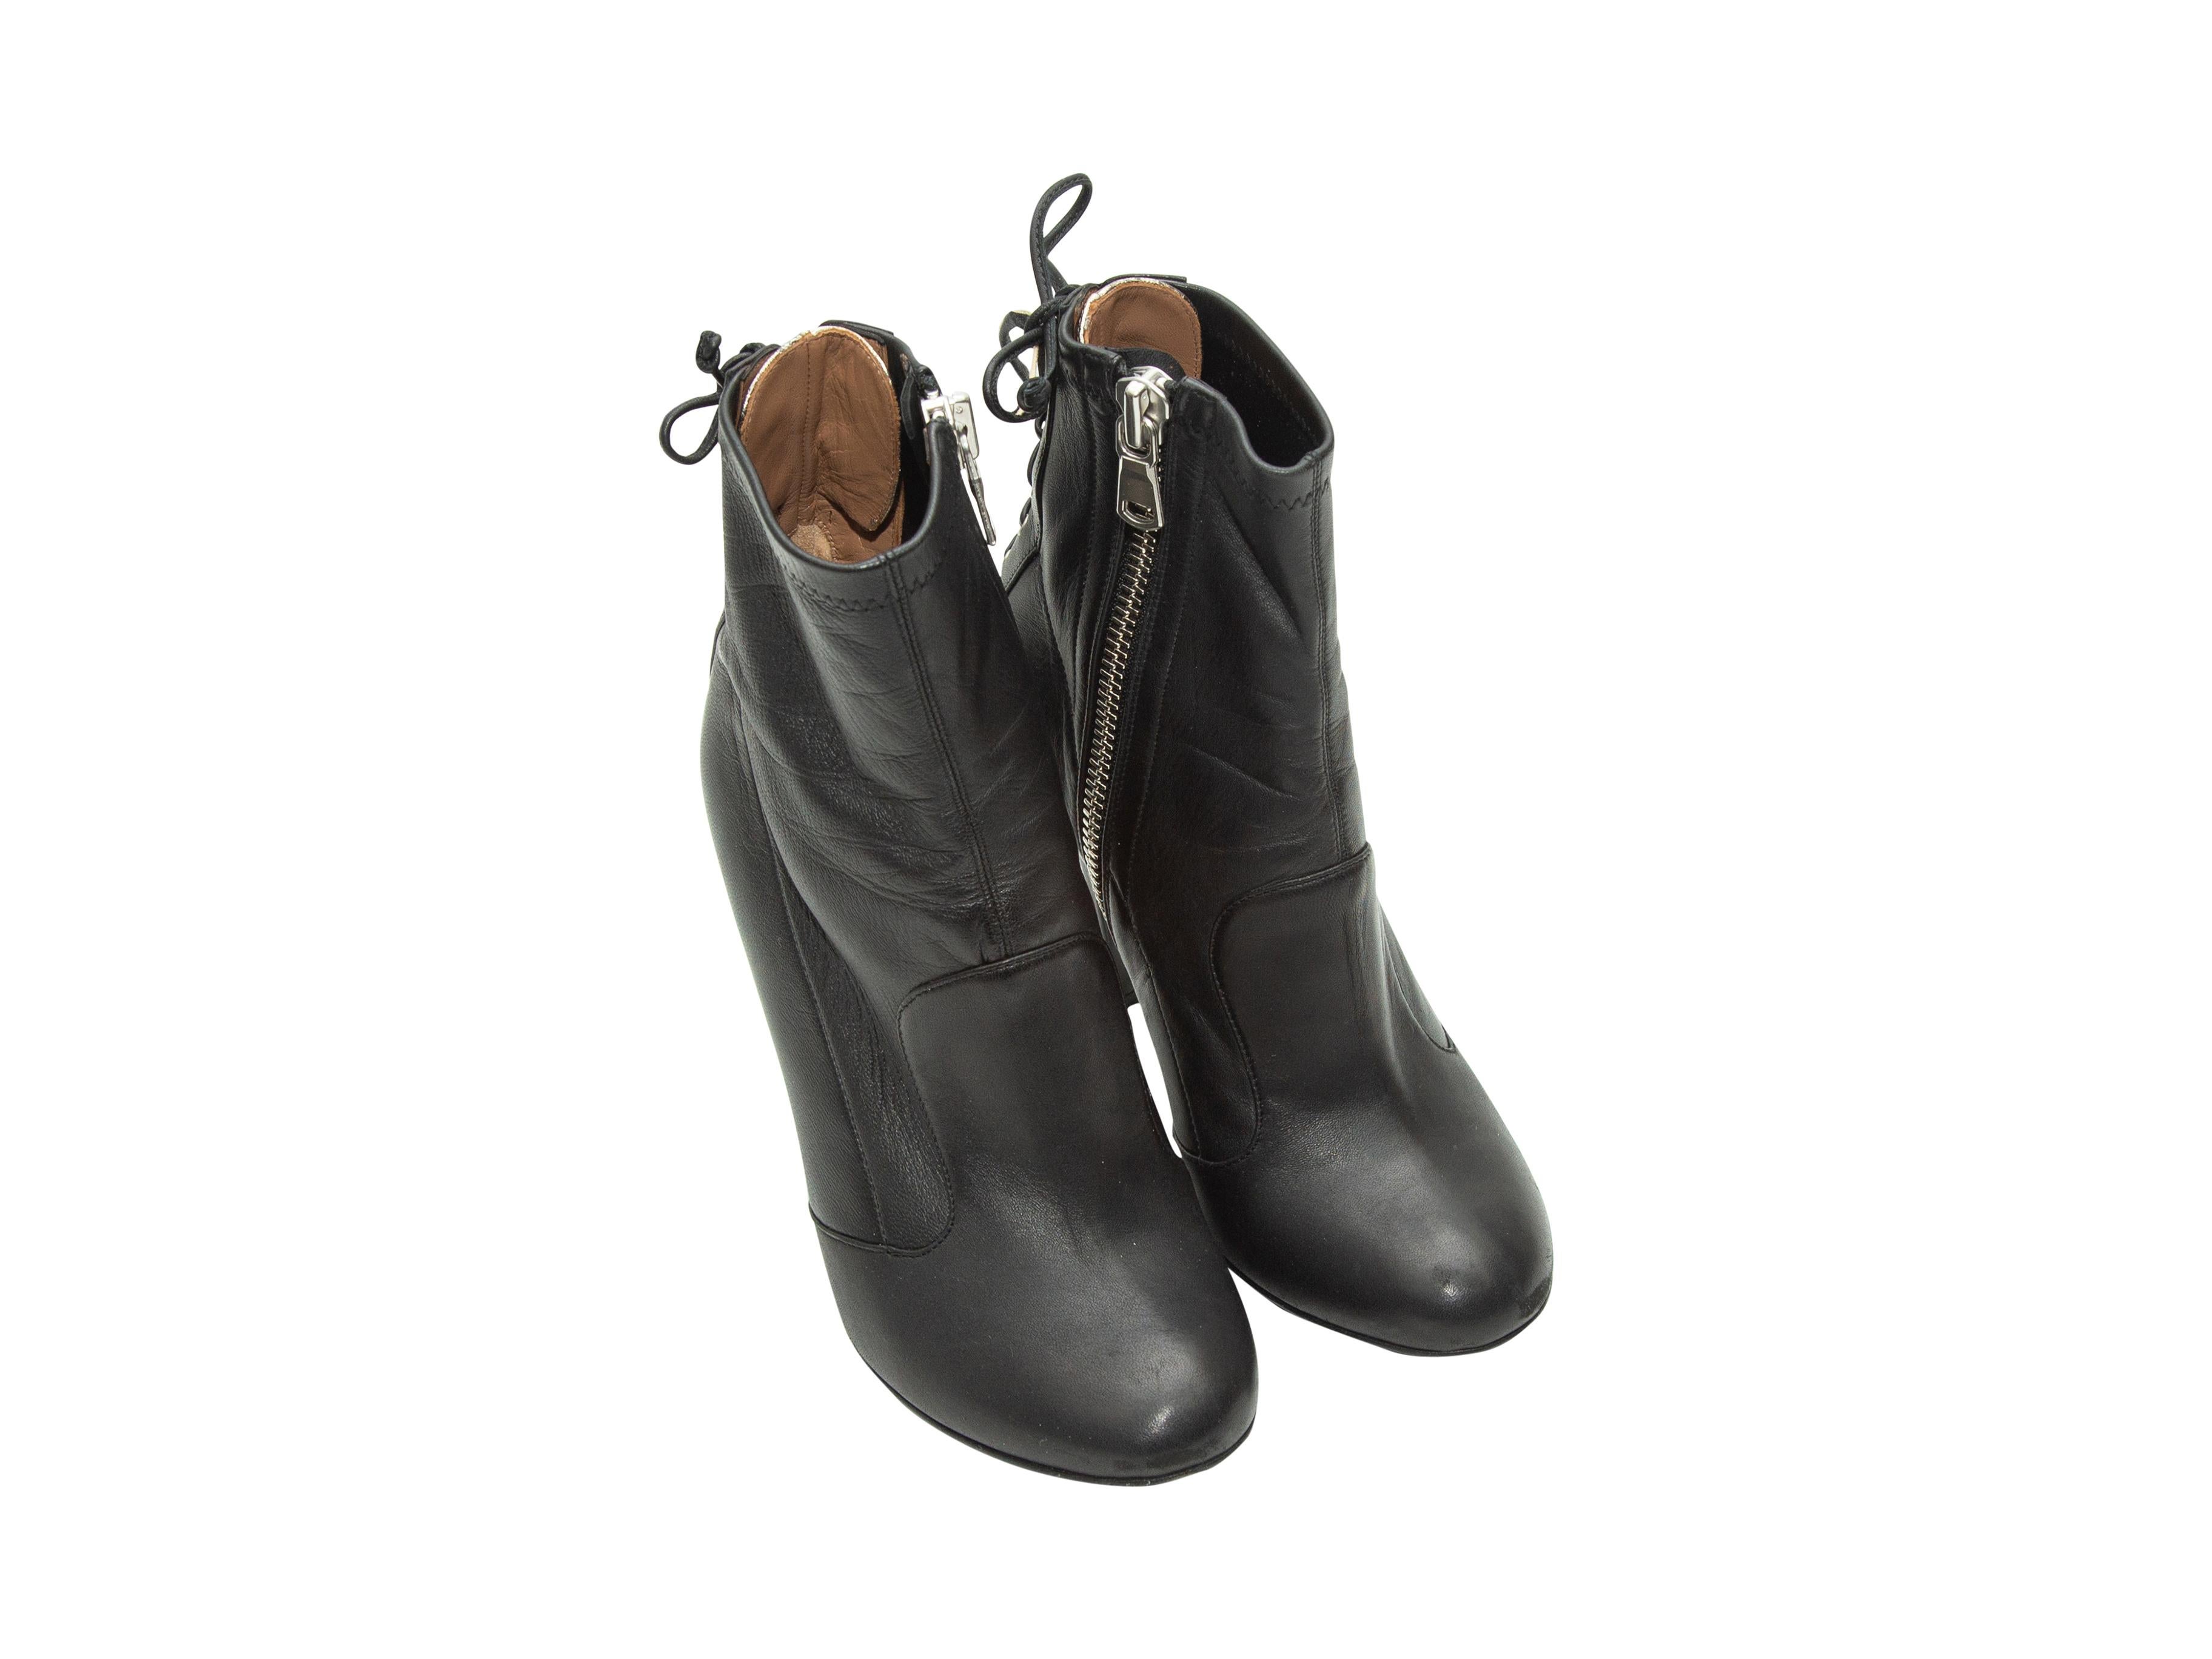 Product details: Black leather round-toe heeled ankle boots by Laurence Dacade. Lace-up detailing at backs. Zip closures at inner sides. Designer size 37.5. 4